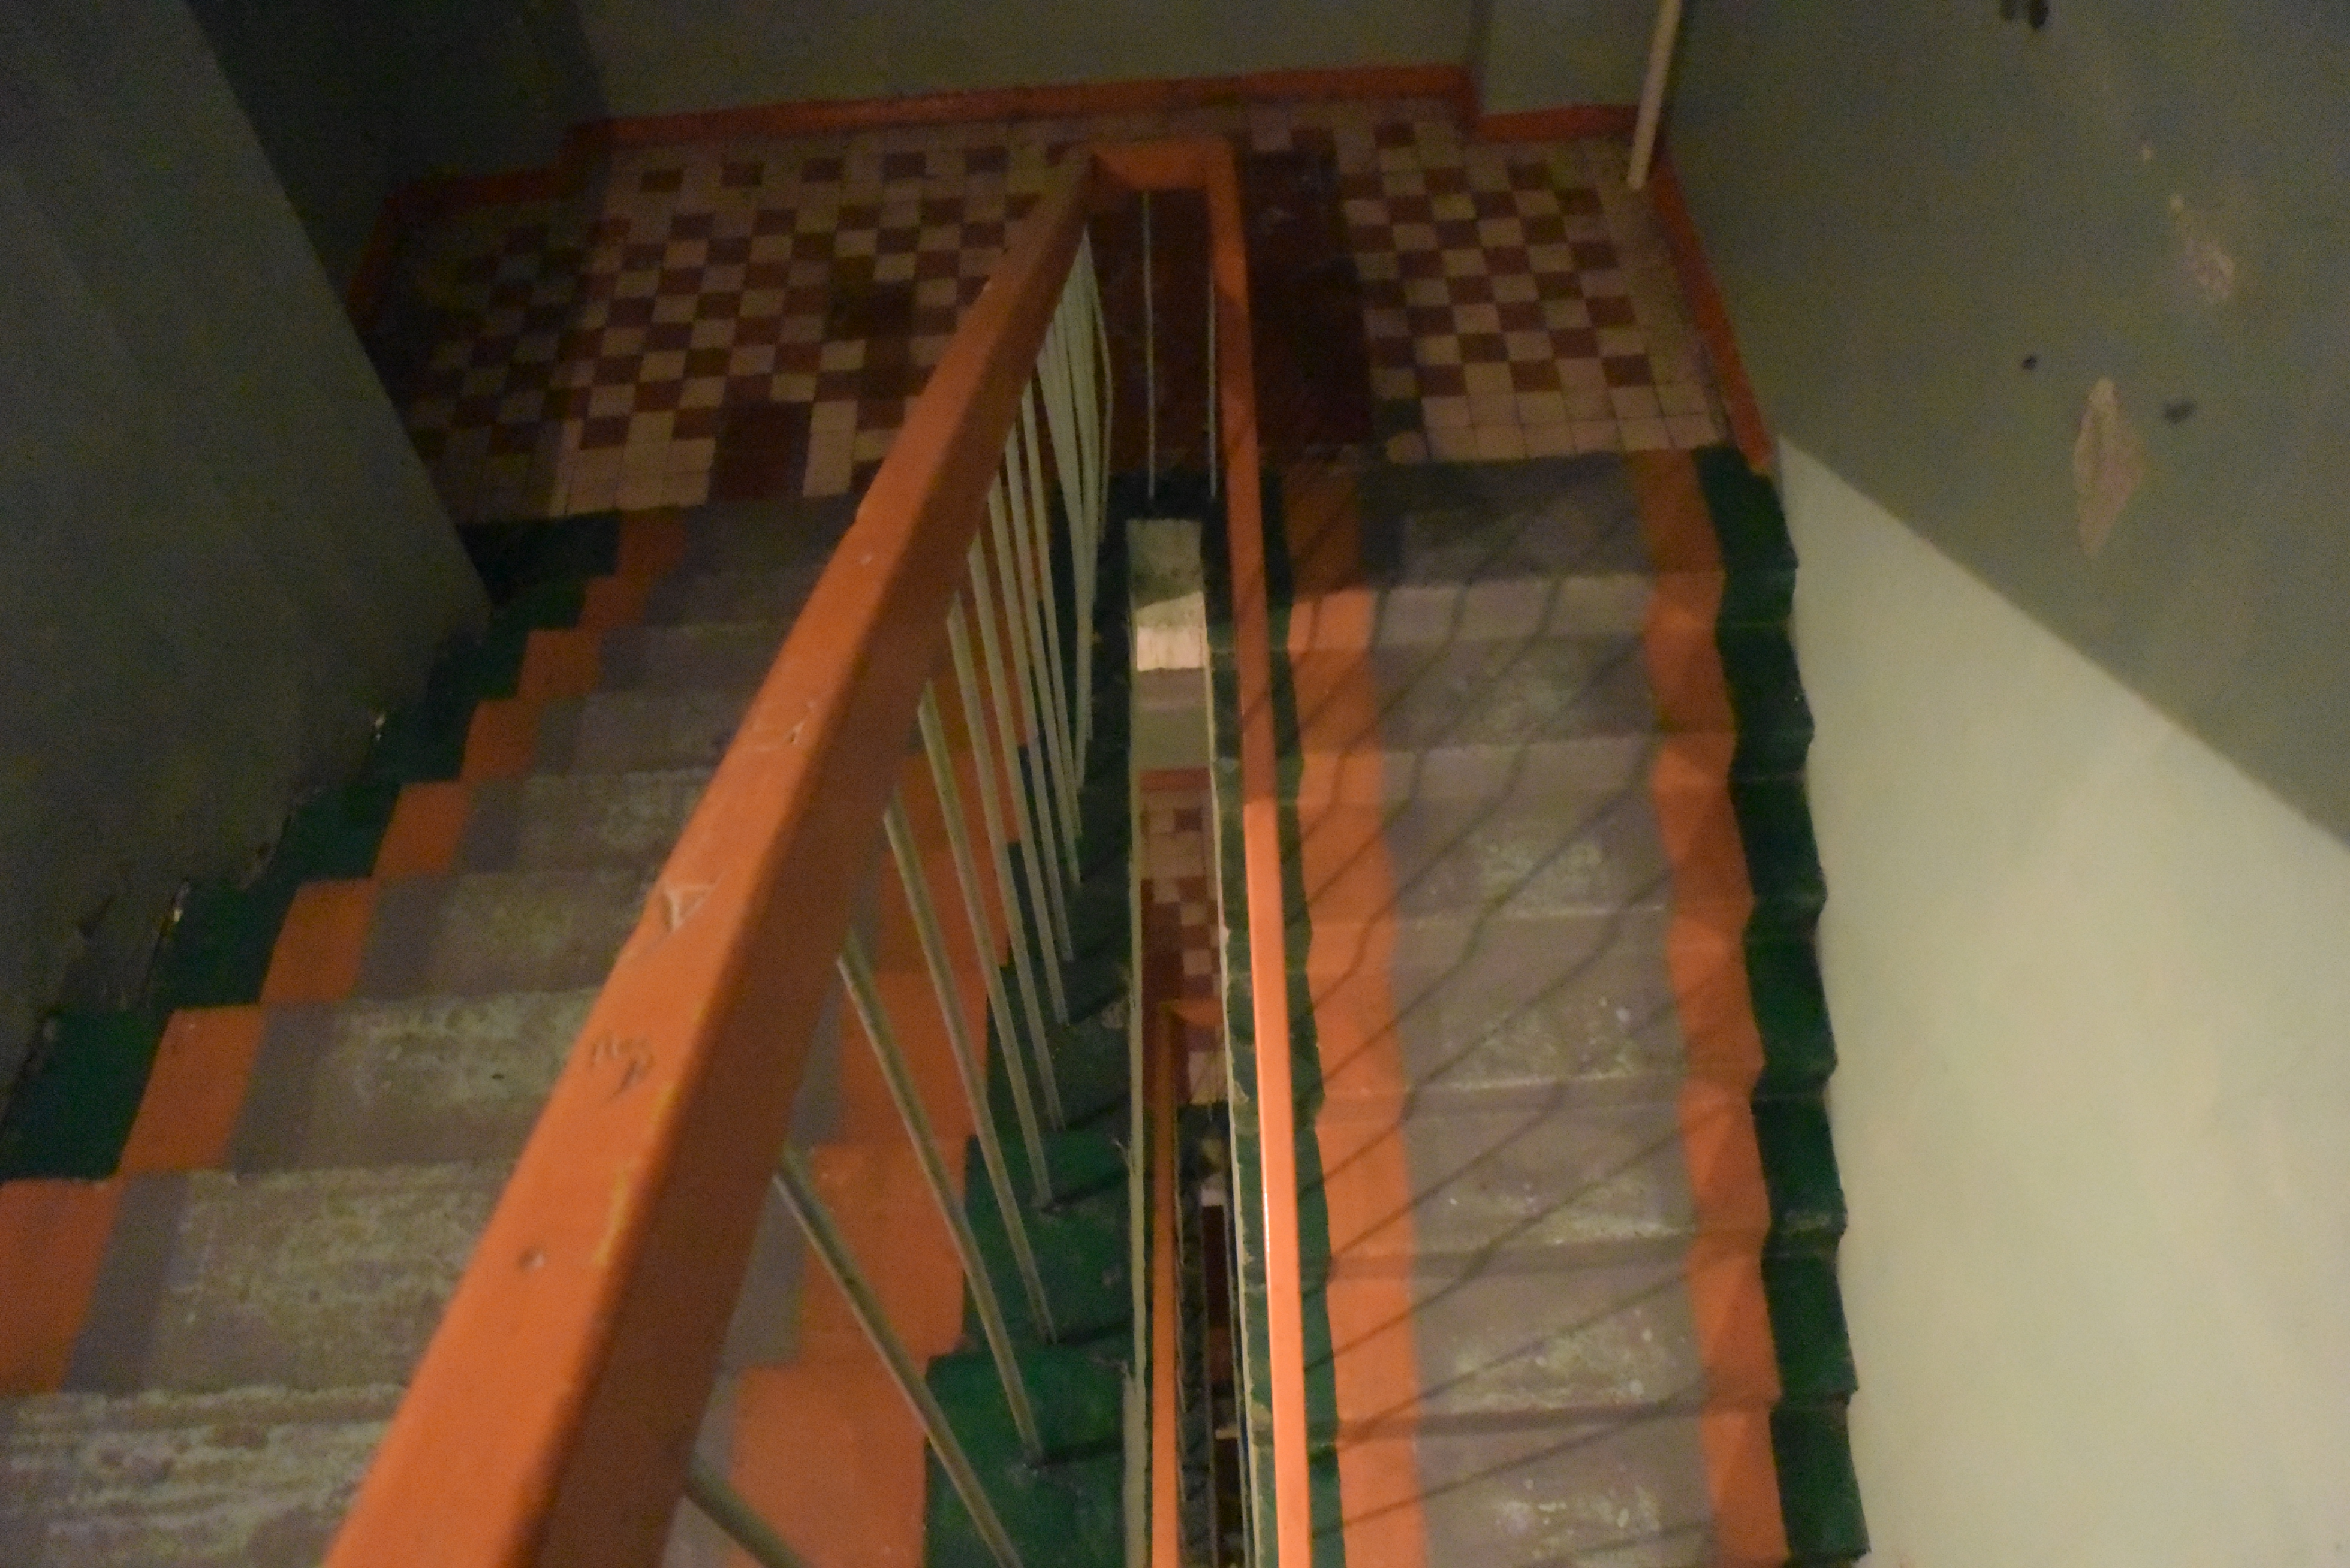 a staircase with orange and green steps